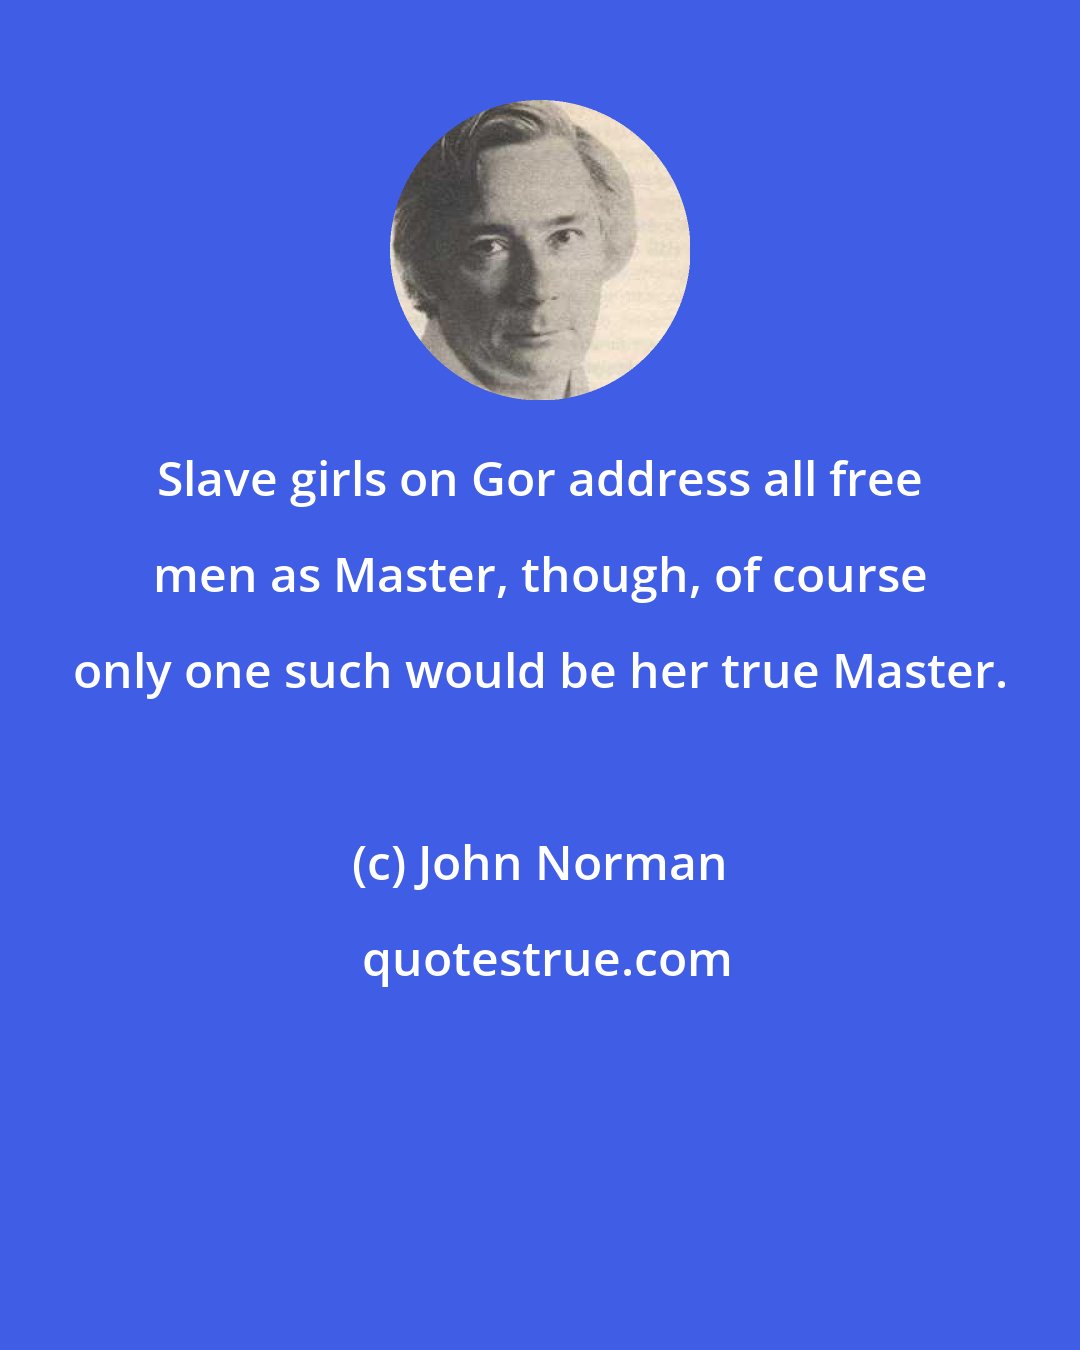 John Norman: Slave girls on Gor address all free men as Master, though, of course only one such would be her true Master.